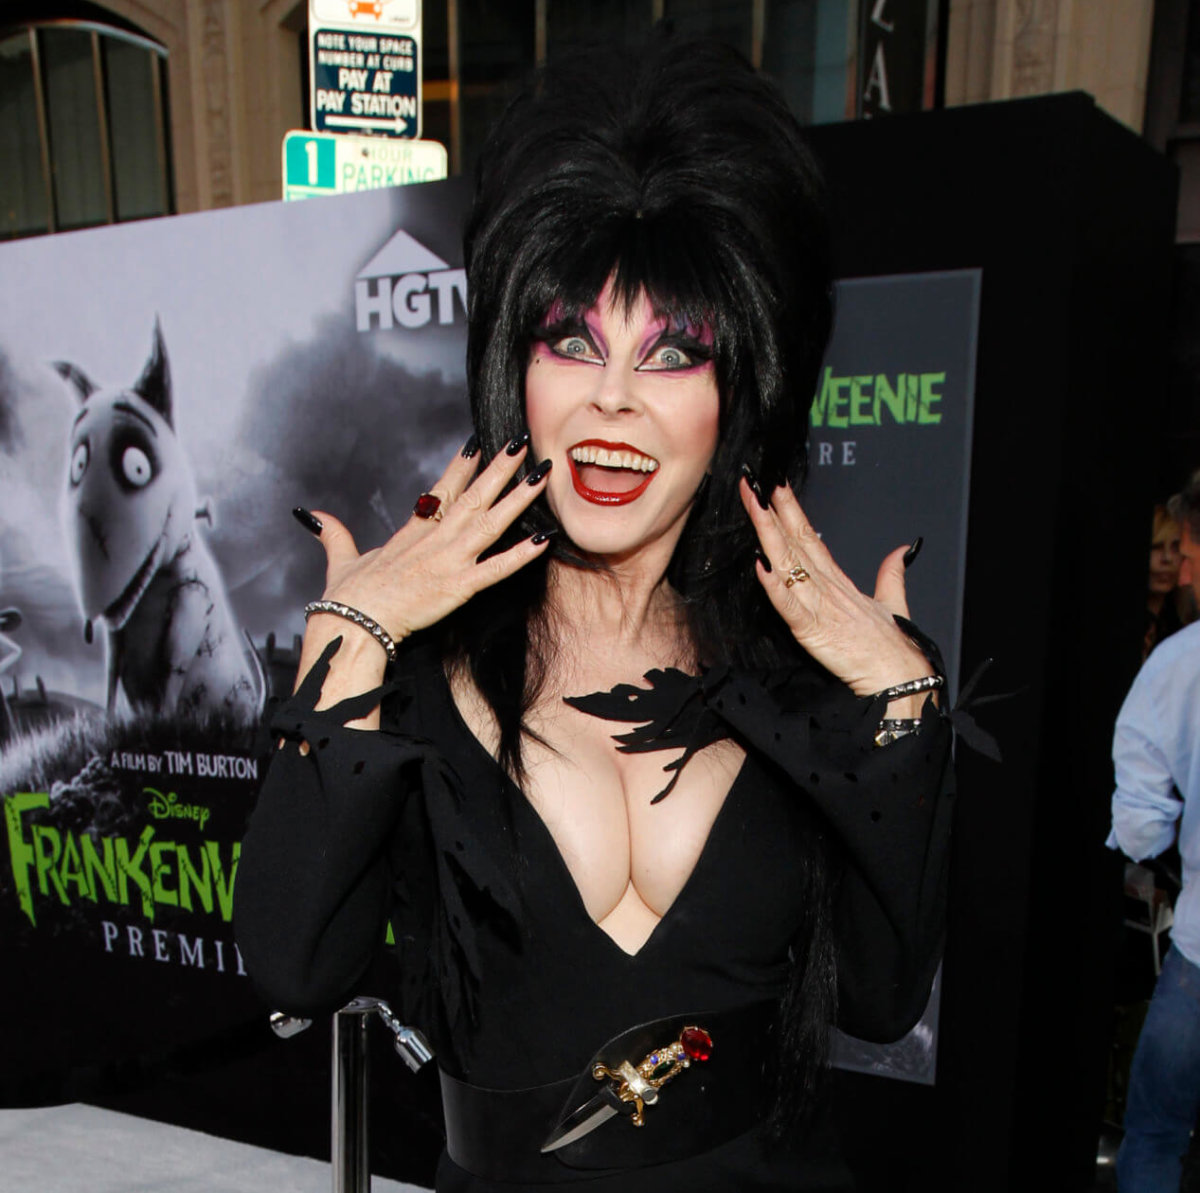 Peterson, also known as Elvira, poses at the premiere of “Frankenweenie” at El Capitan theatre in Hollywood